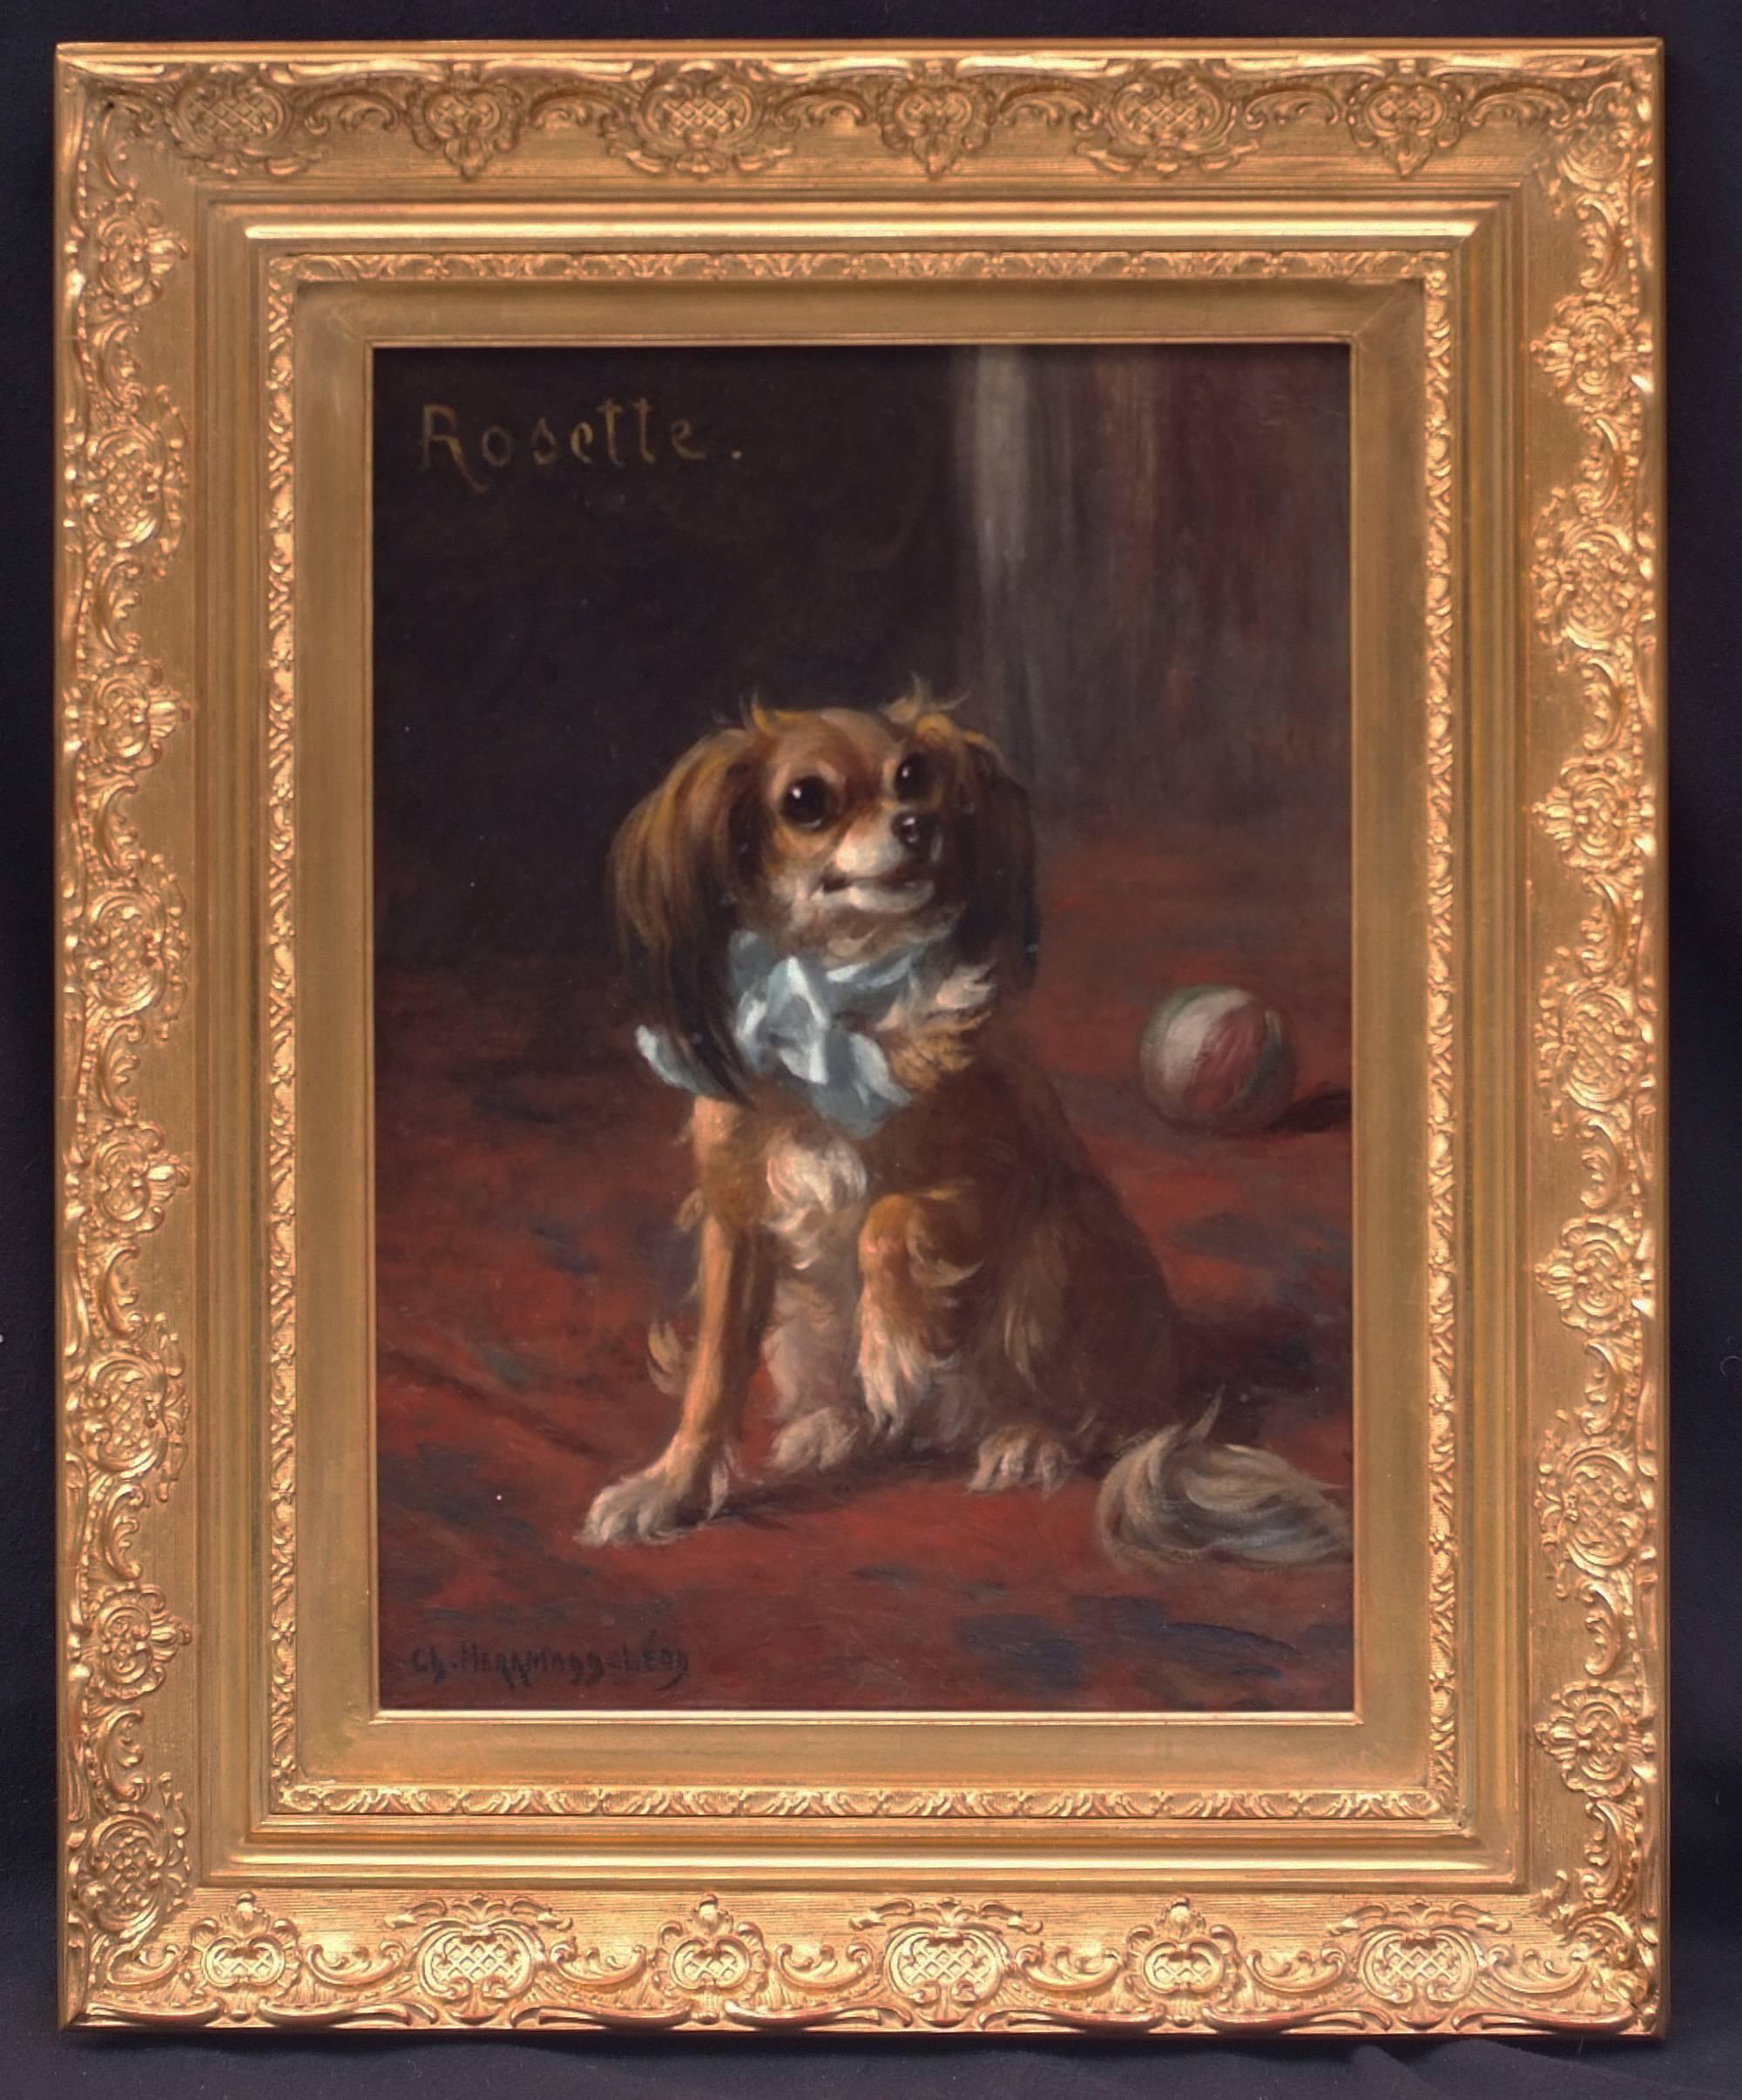 Charles Herrmann-Léon Interior Painting - Painting 19th century - Portrait of a Dog in interior